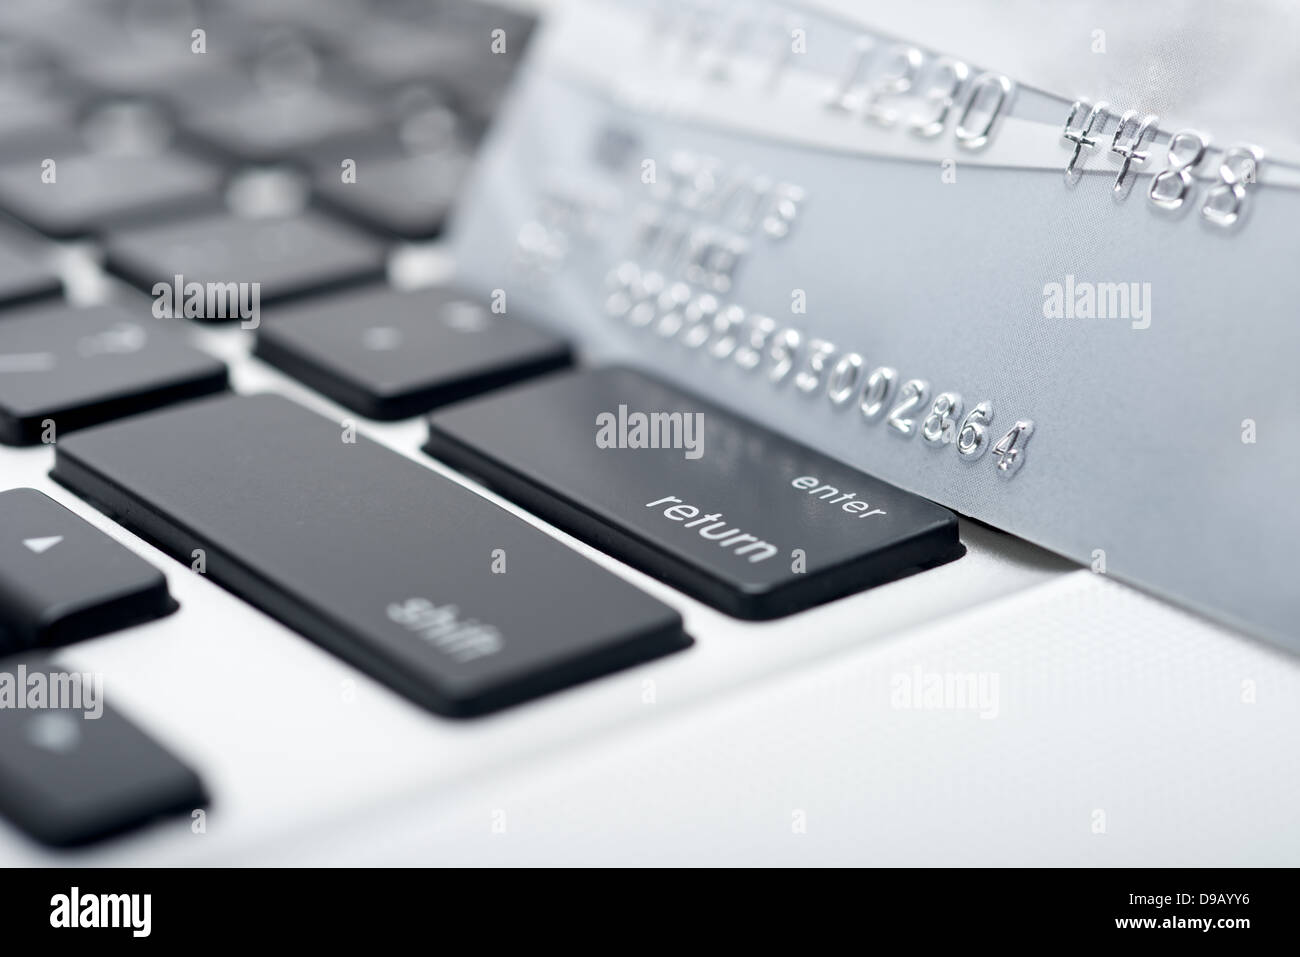 Concept of online hotel reservation with keyboard and credit card Stock Photo